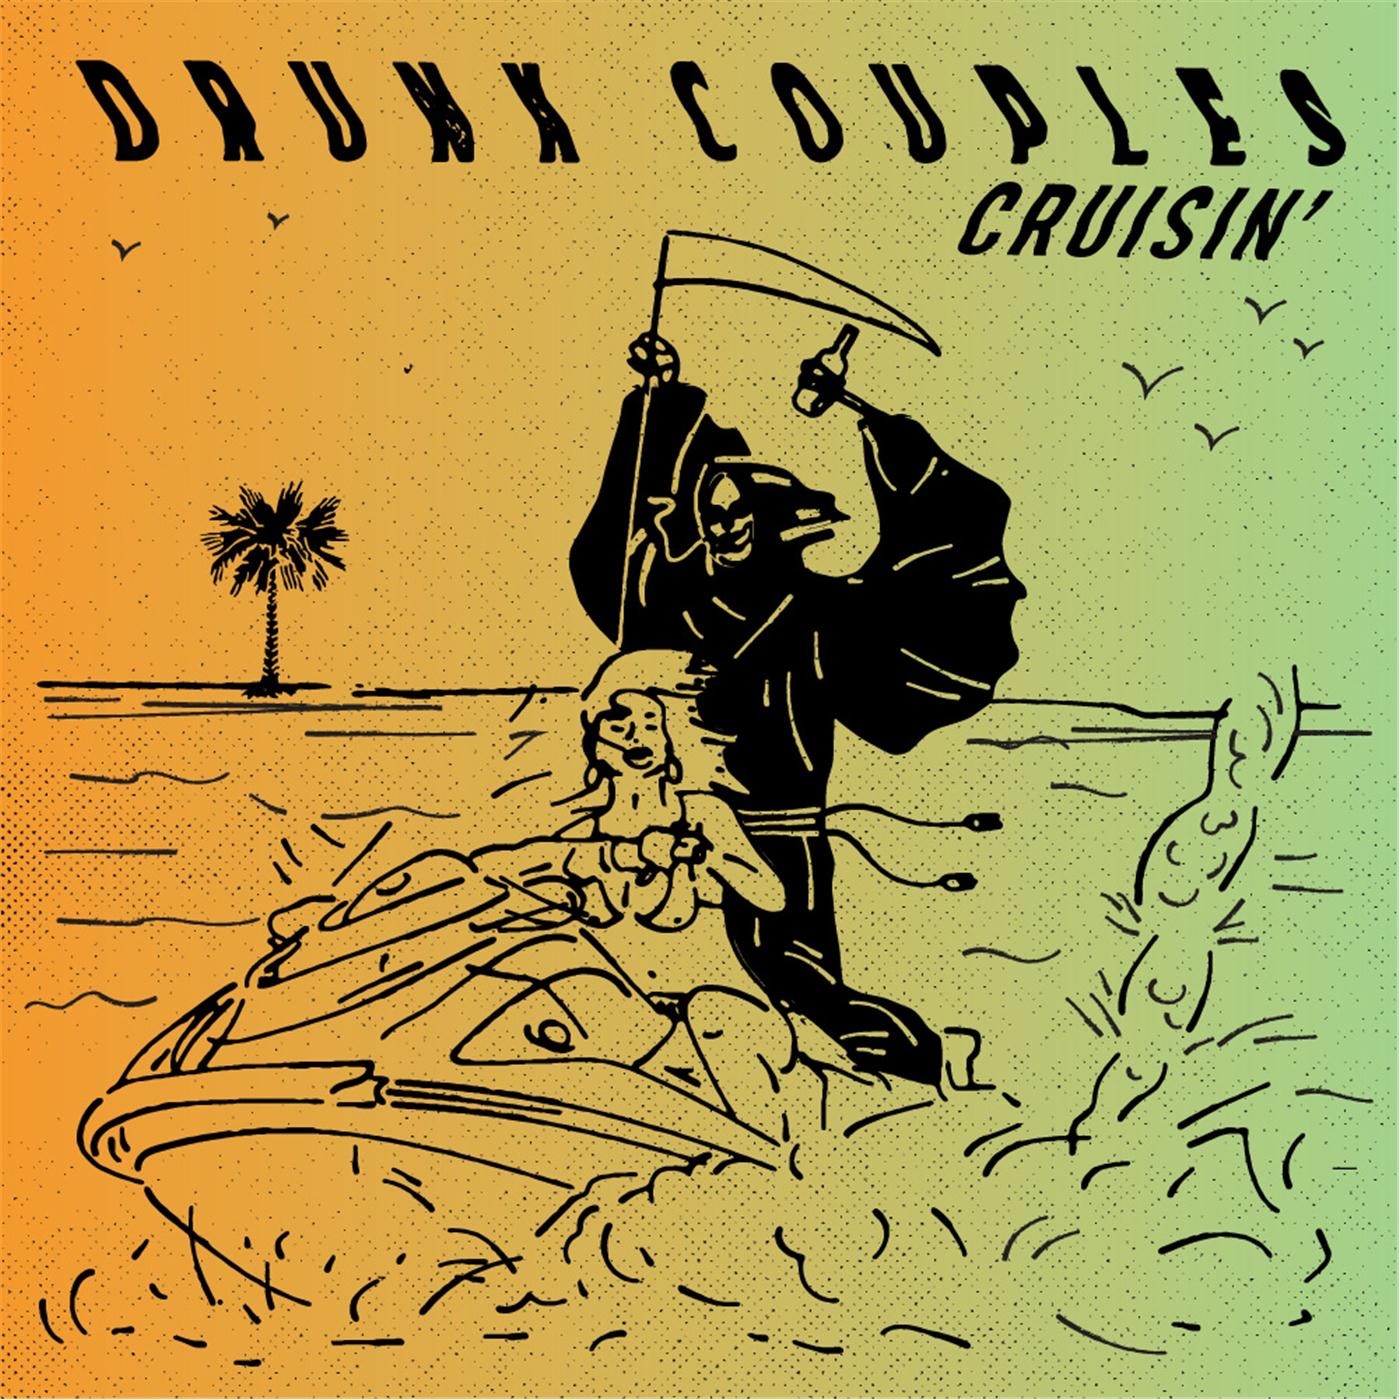 Cruisin' by Drunk Couples